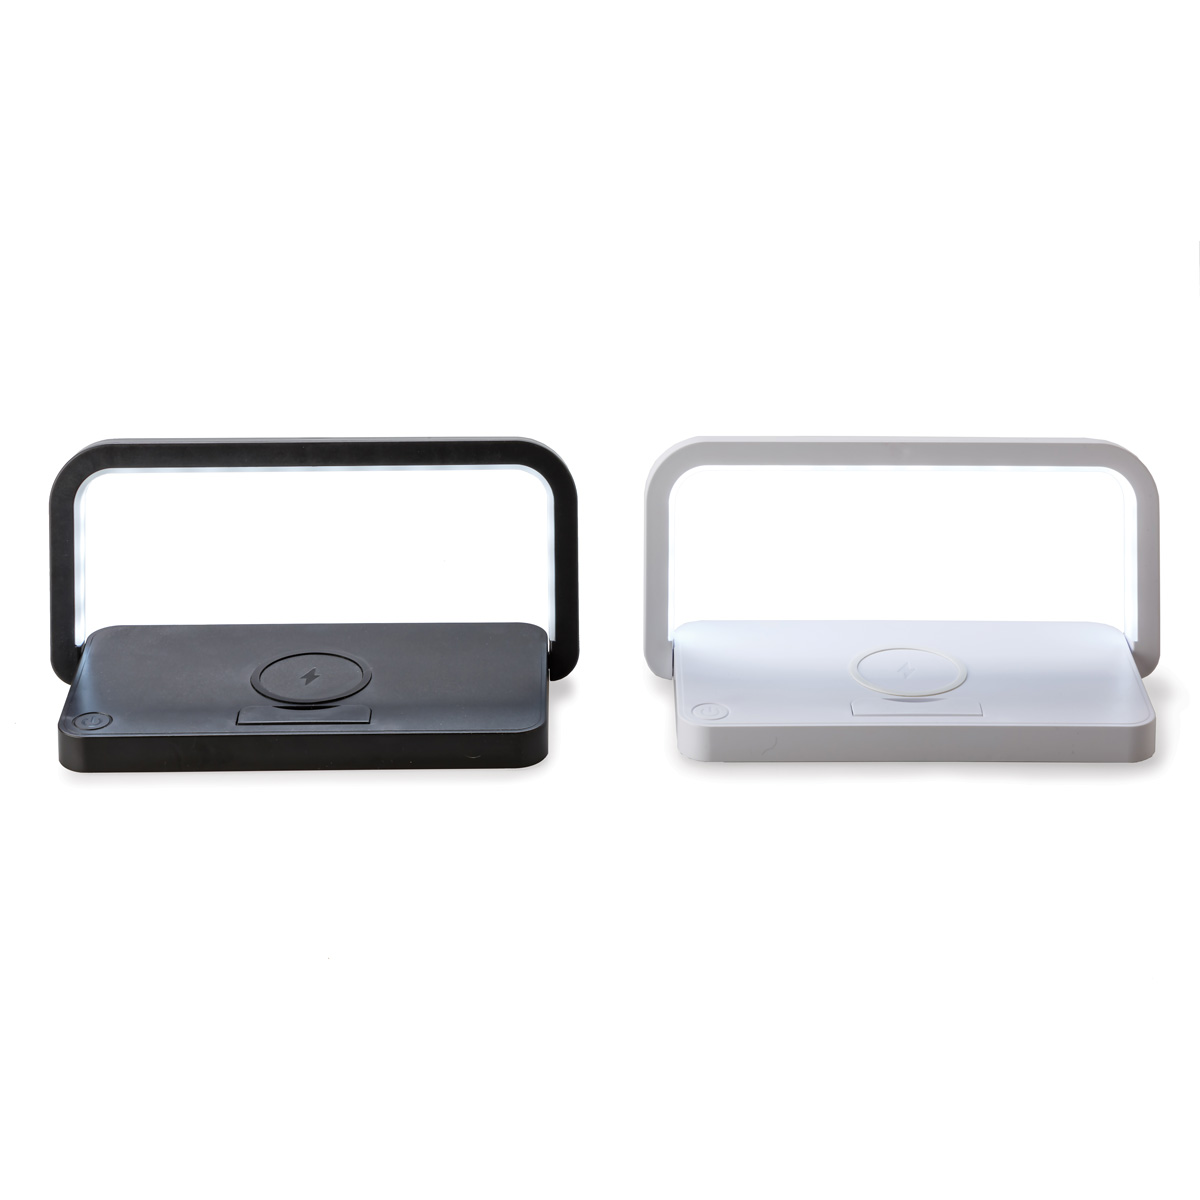 Desktop Wireless Charger Product Image